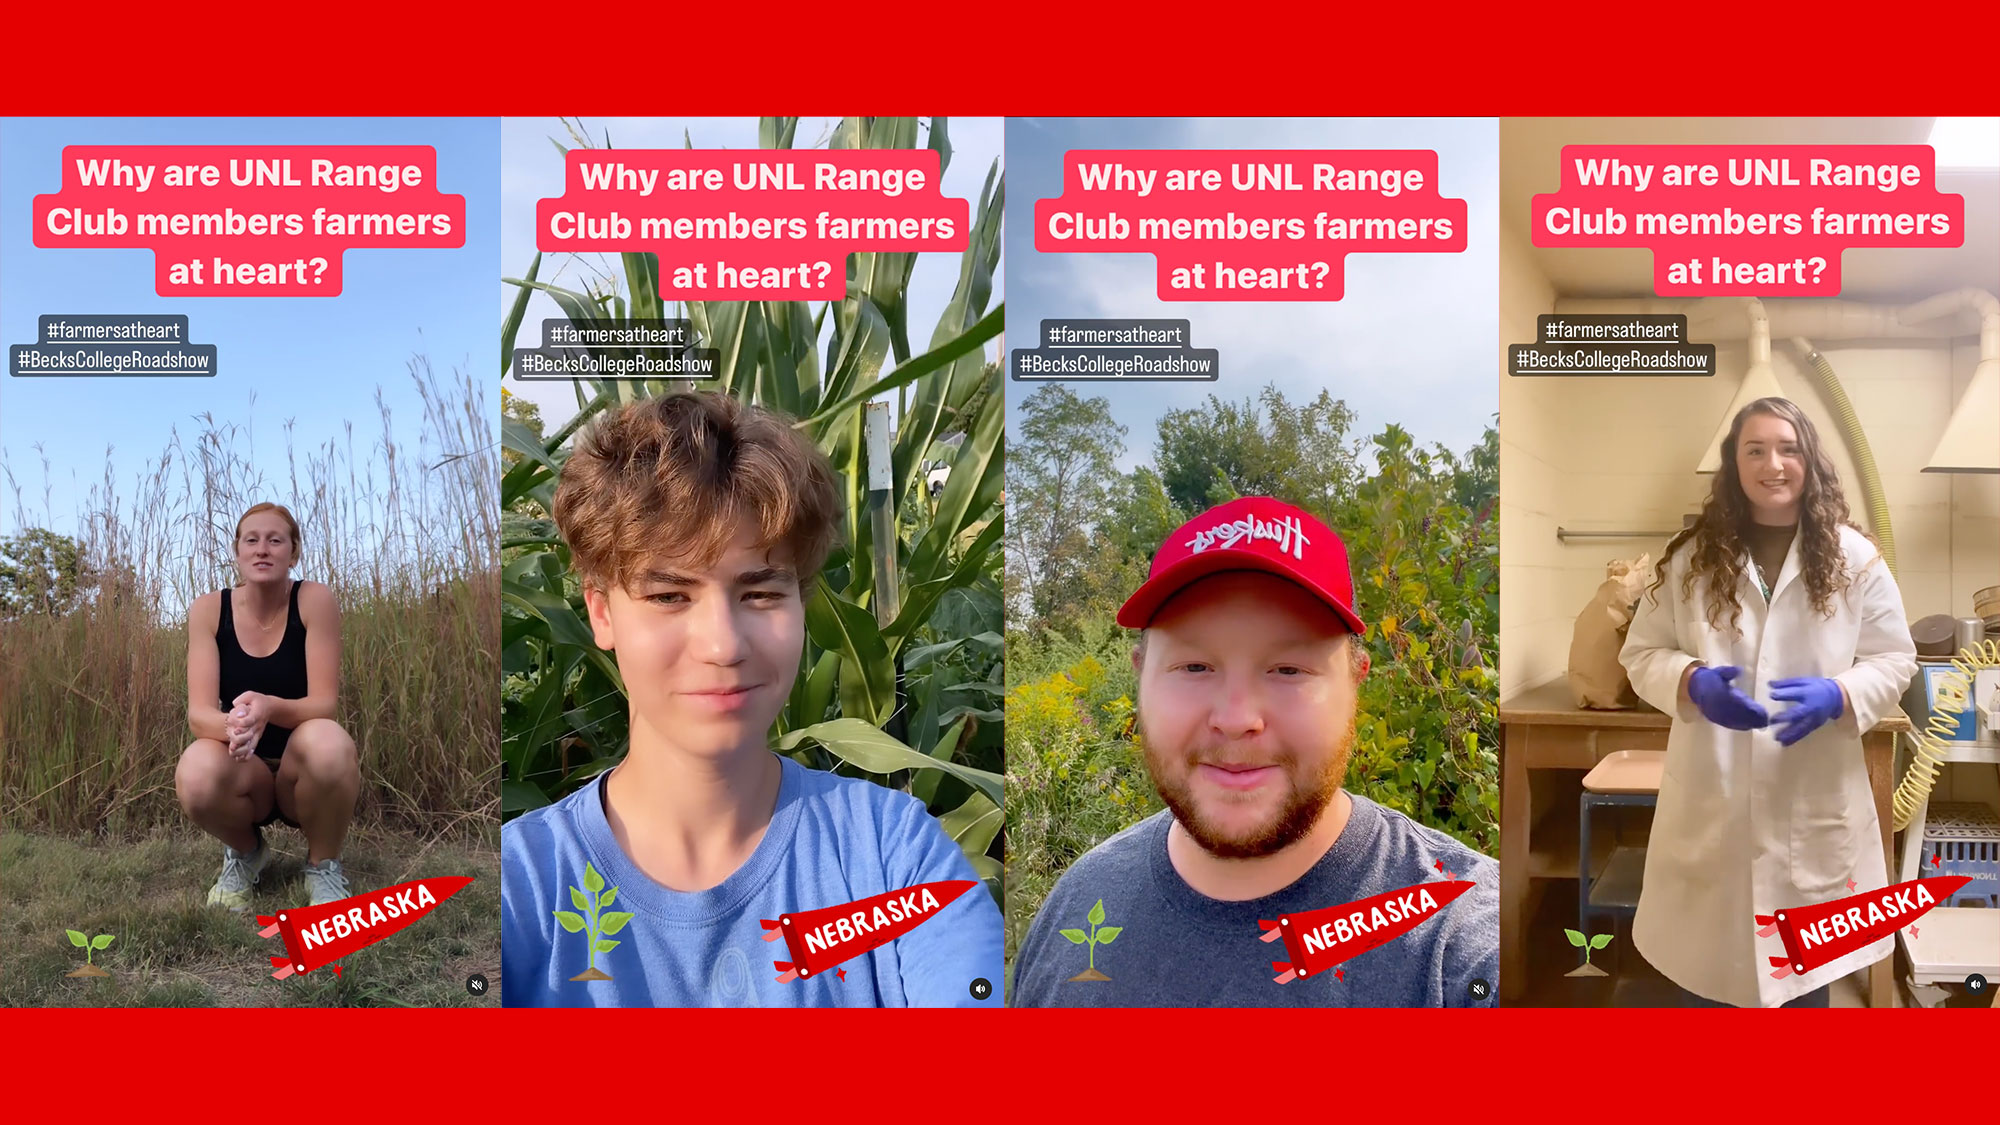 Range Management Club members Sheridan Wilson (from left), Lydia Regier, Jacob VanDress and Sadie Ference explain why ‘We’re all farmers at heart’ in an Instagram Reel produced by the club for Beck’s/U.S. Farm Report social media contest held at Nebraska Sept. 15.